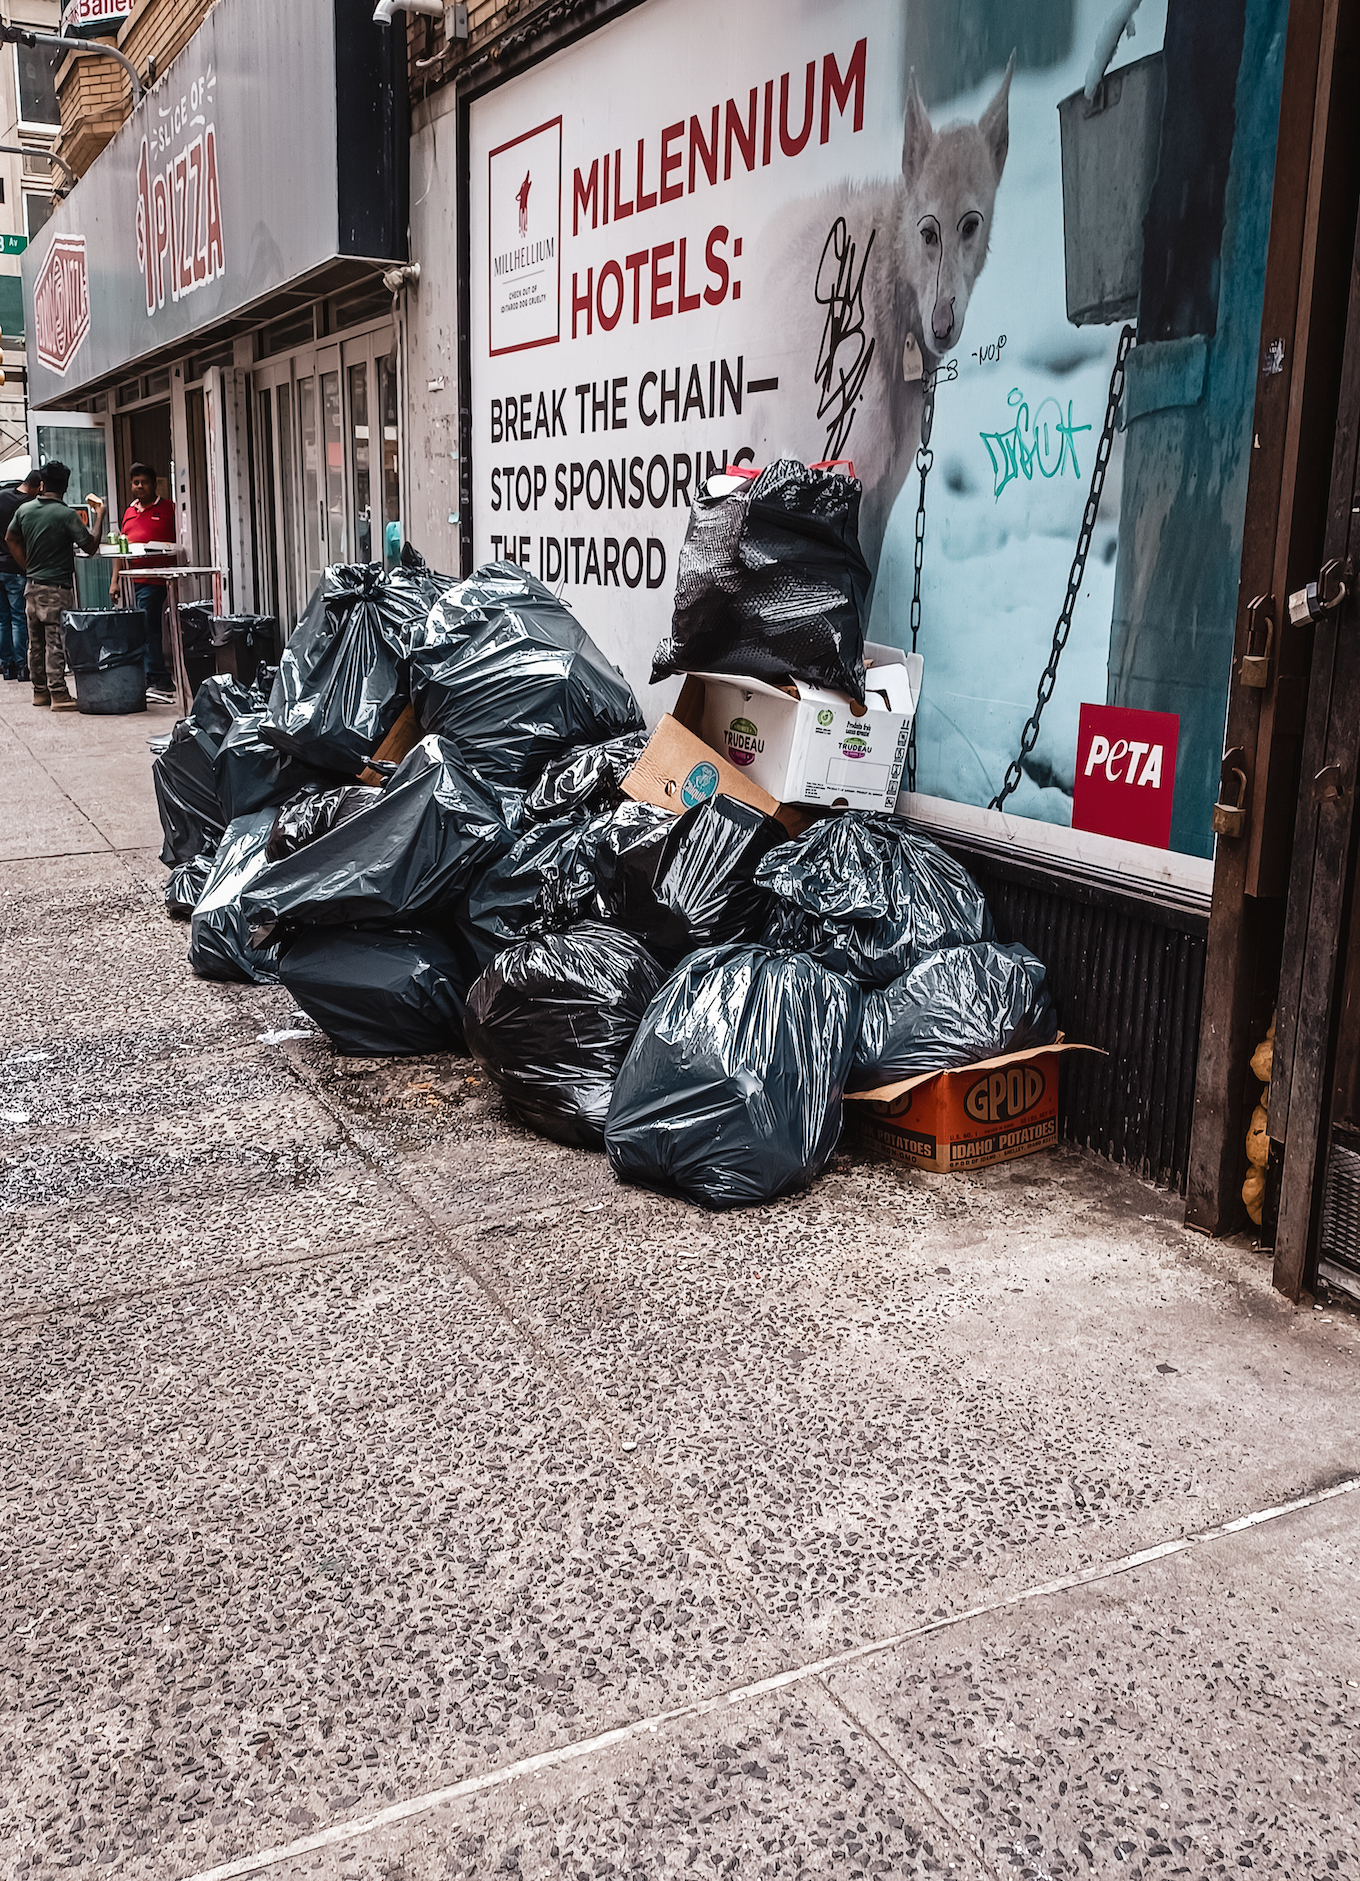 Mounting heaps of garbage are just some of the reasons I hate New York City.